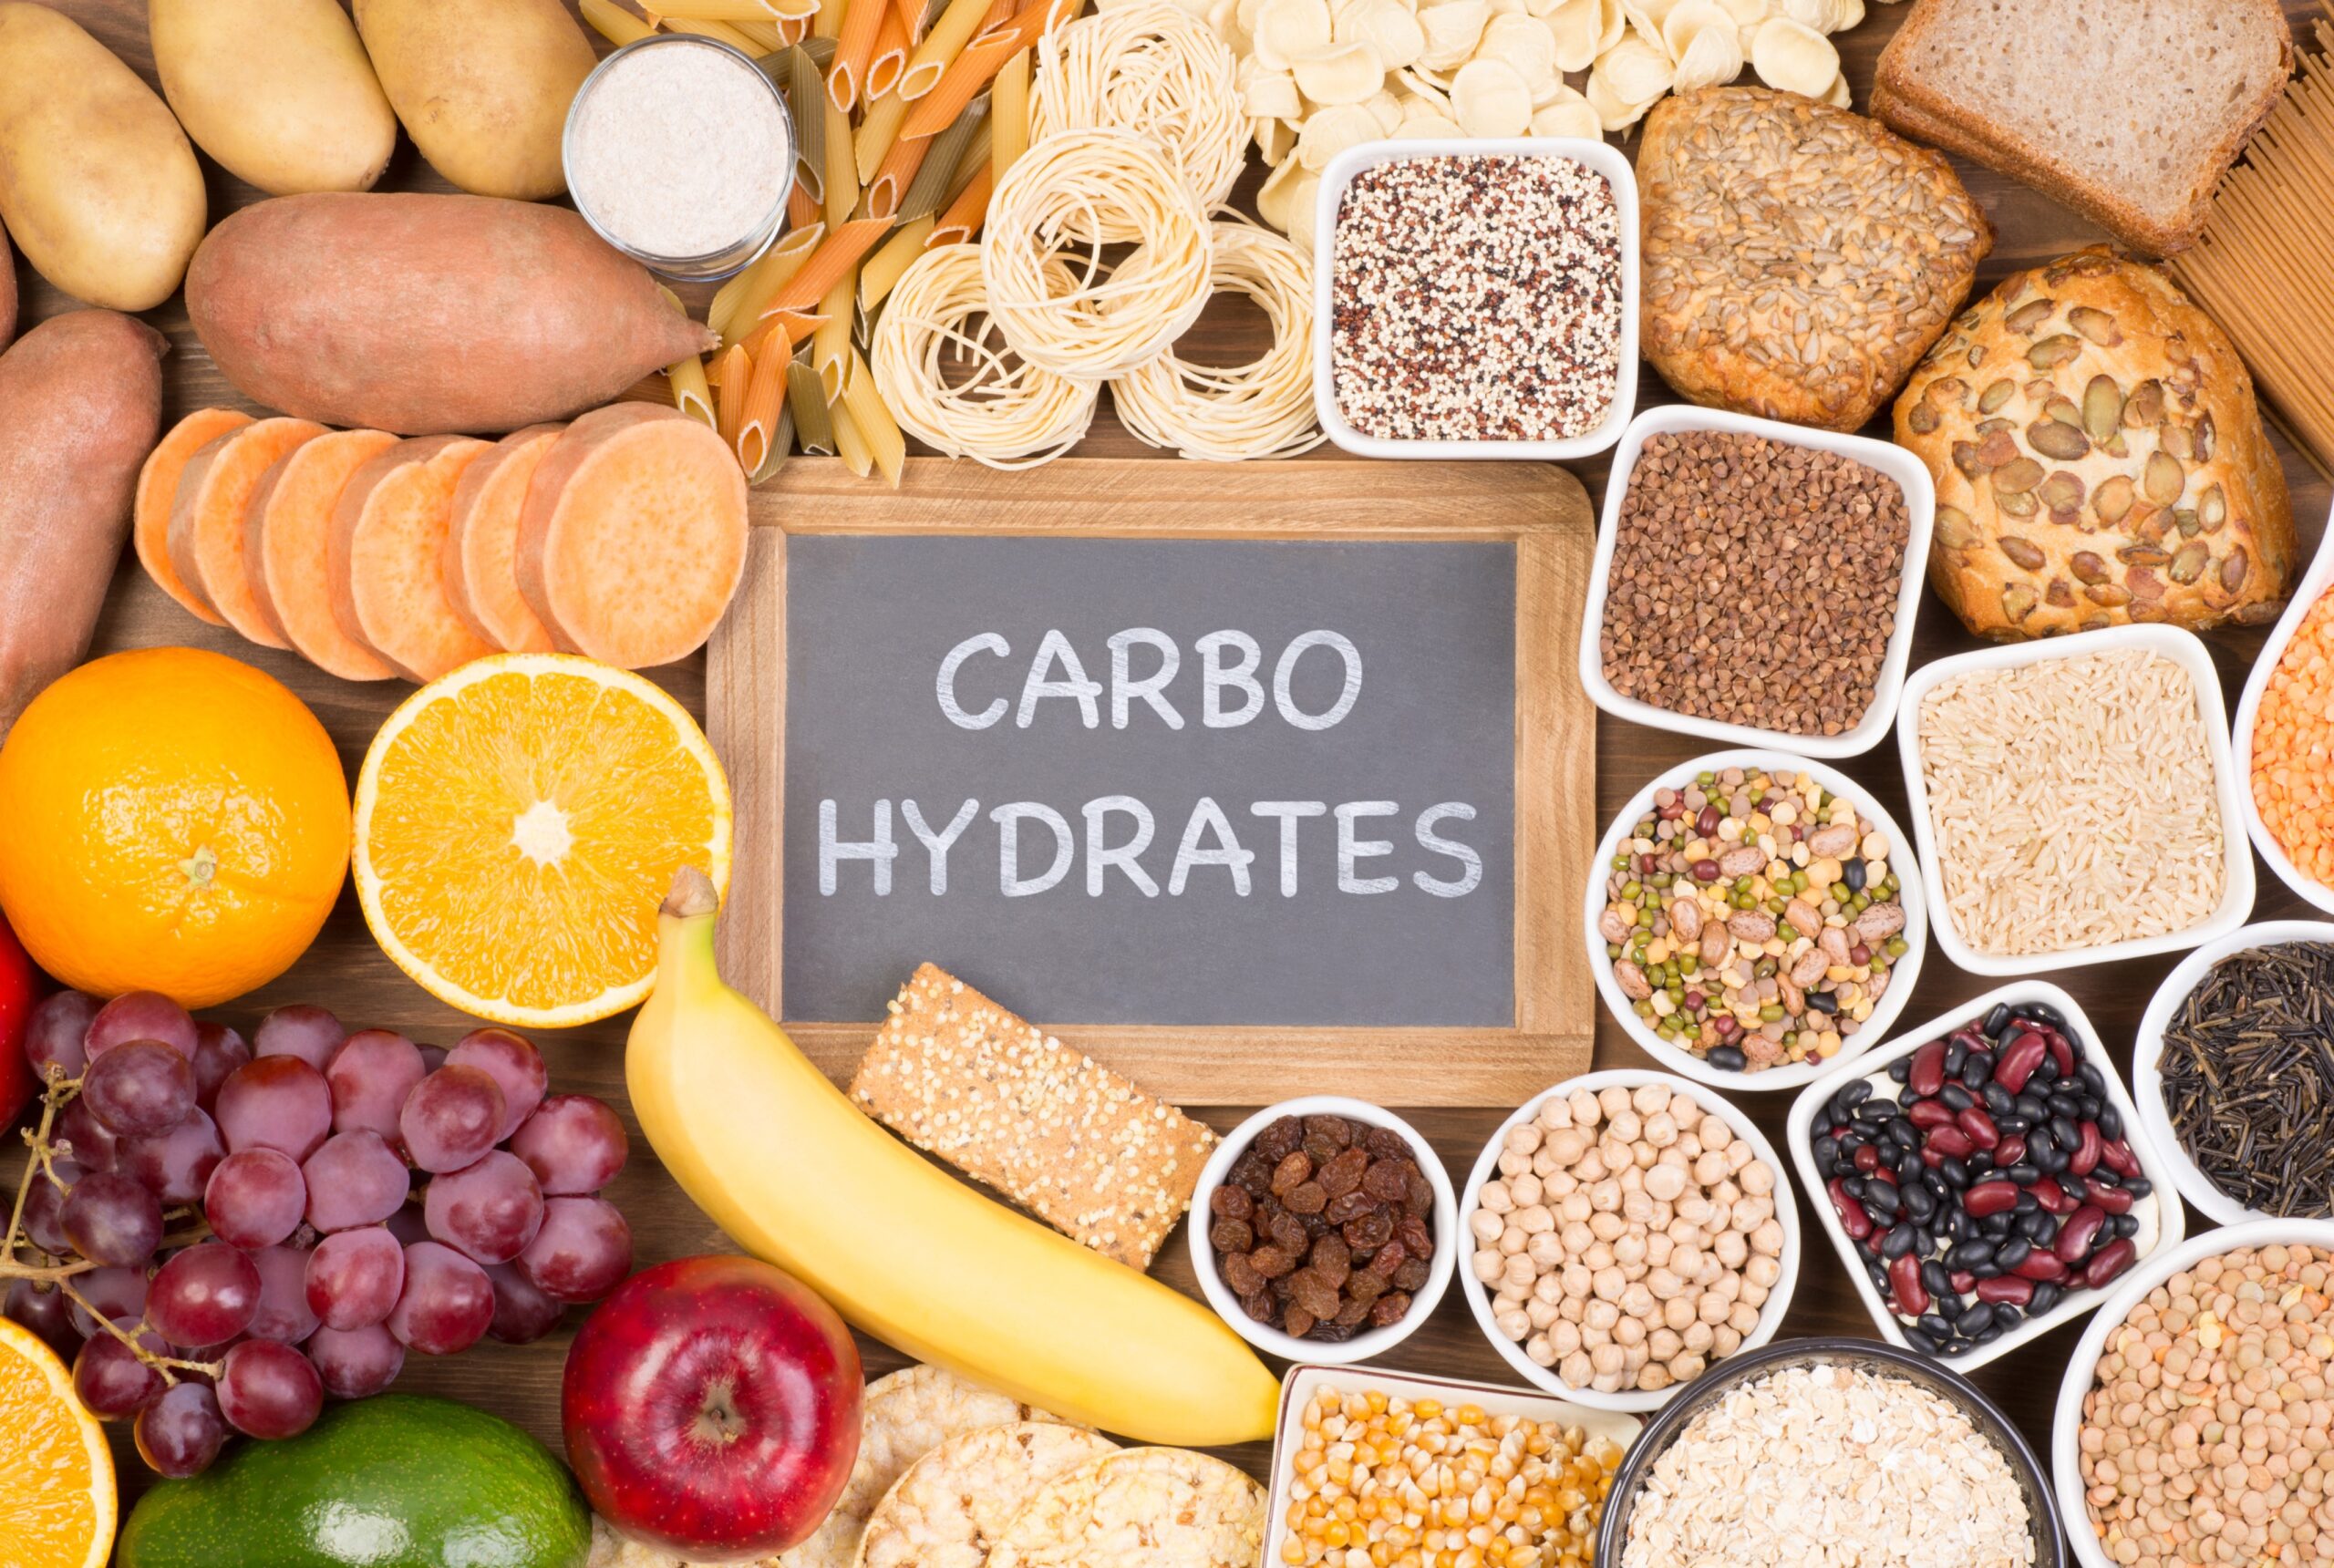 Are There Good And Bad Carbs?